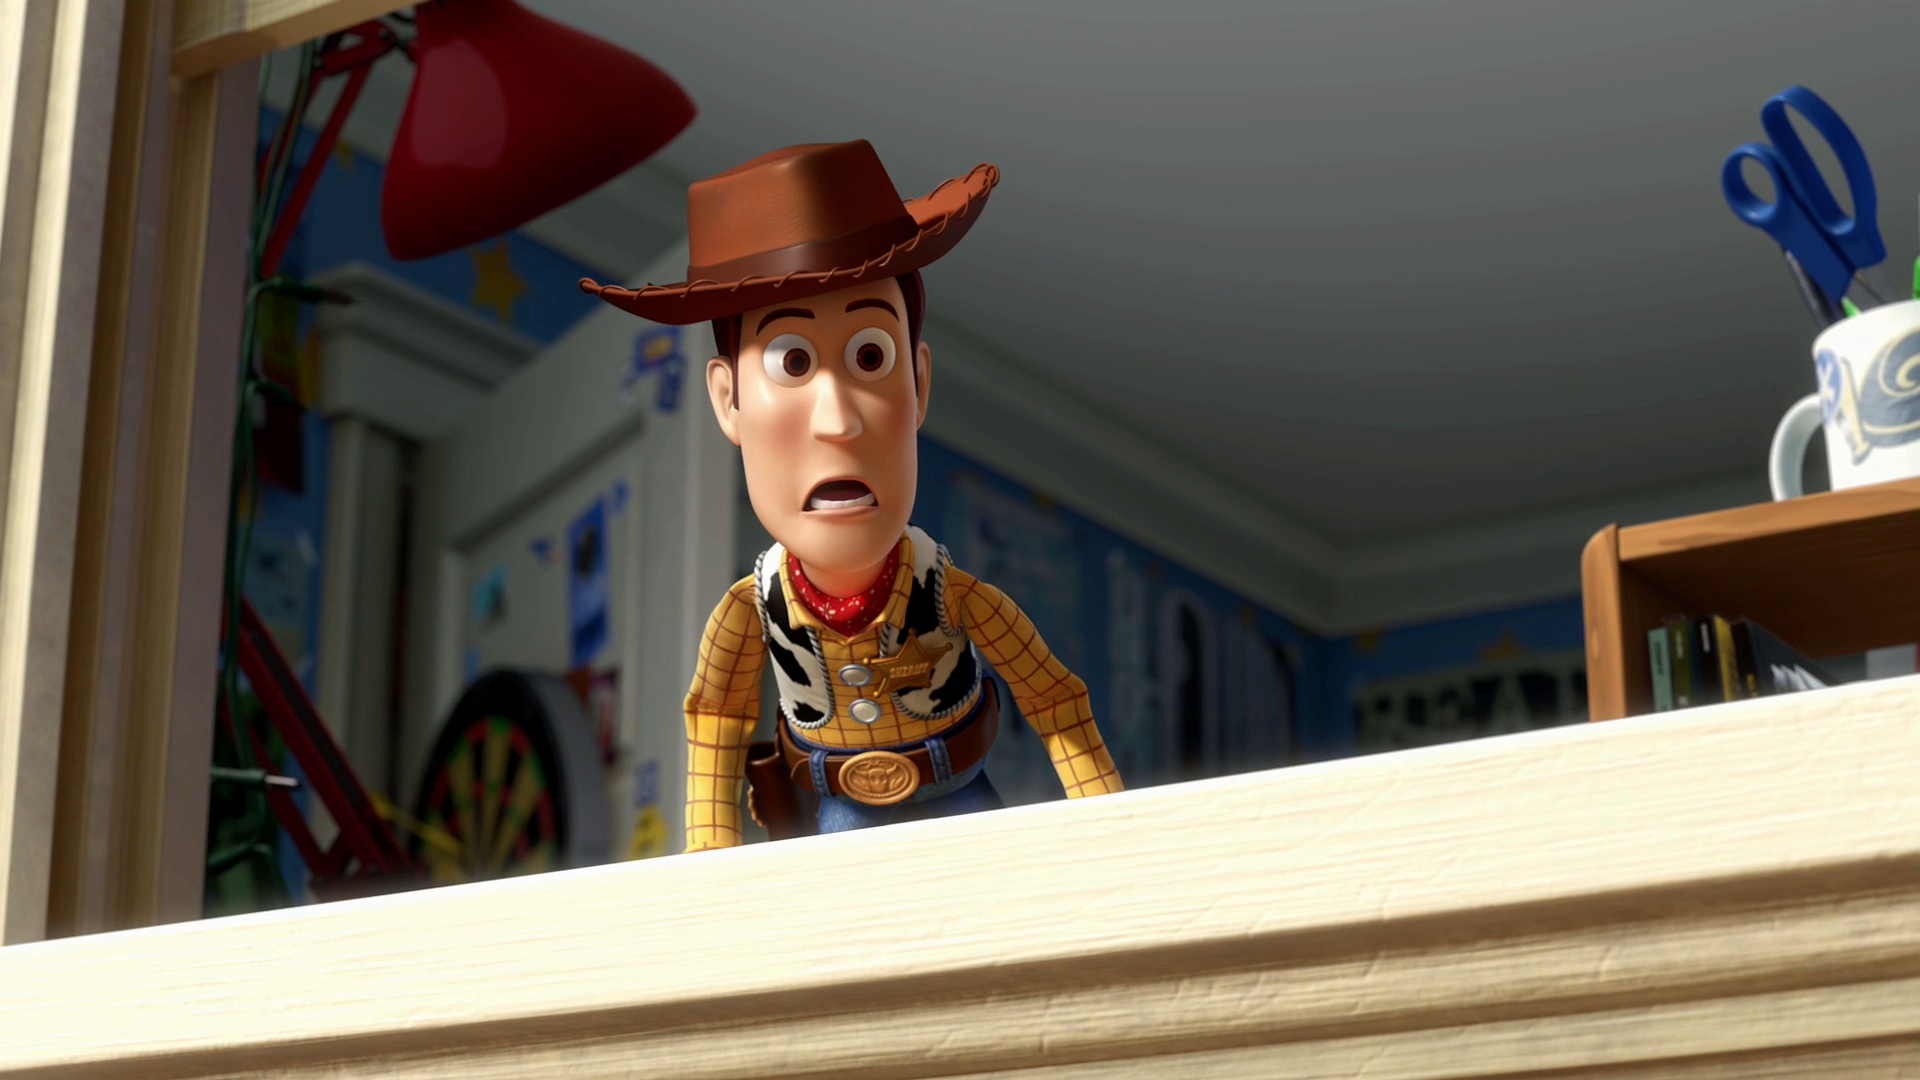 Tables lamps toy story woody hats #Qlah